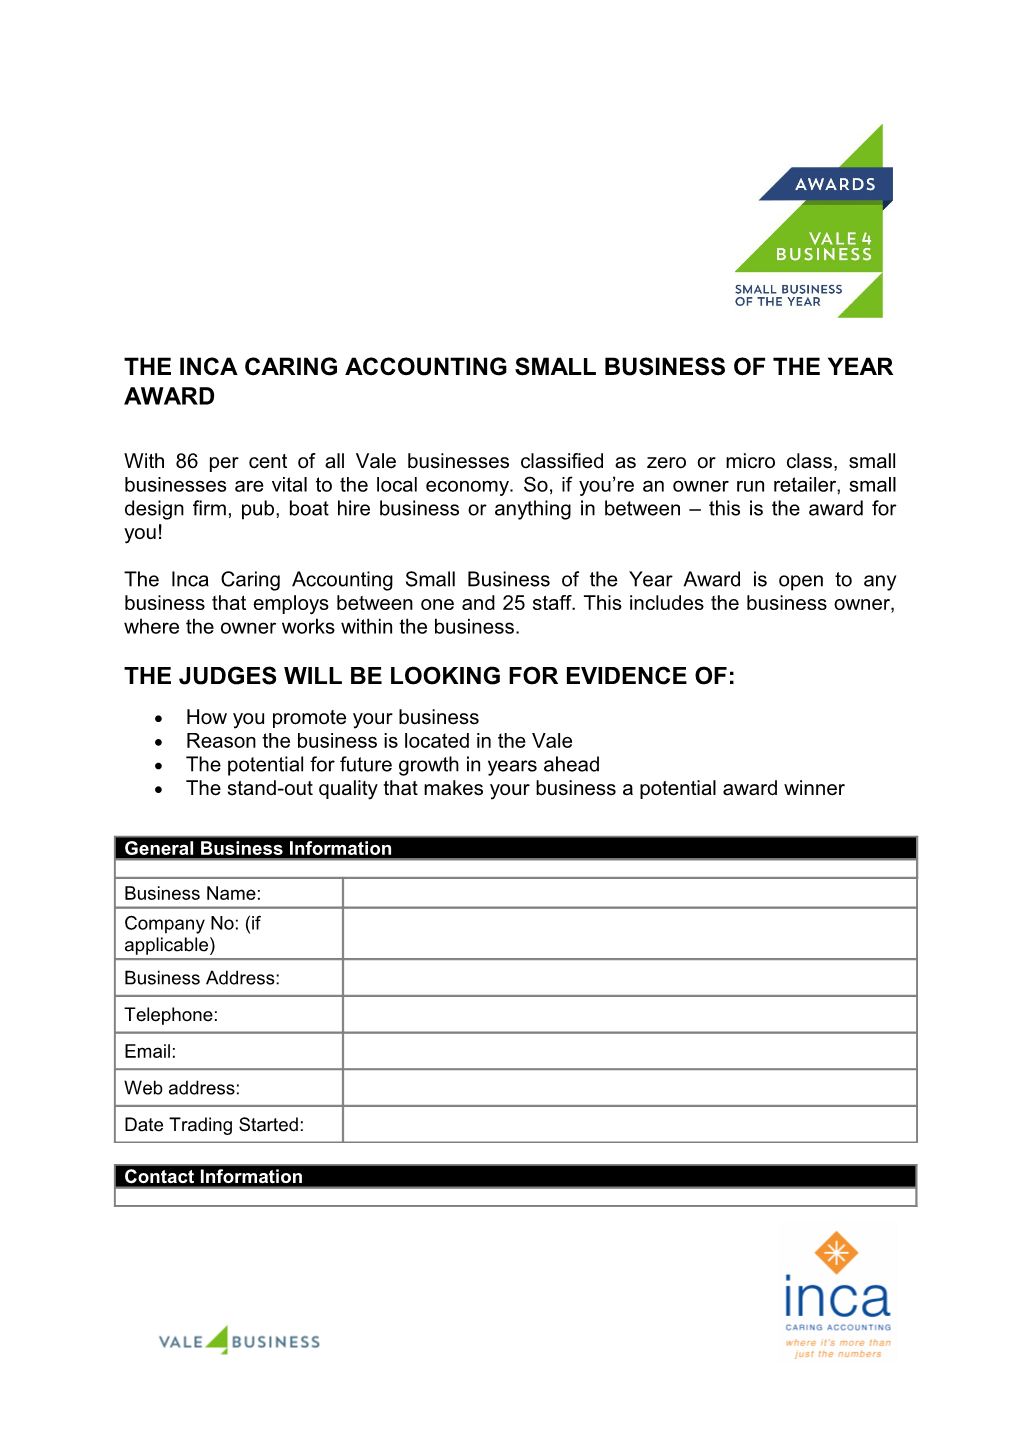 The Inca Caring Accountingsmall Businessof the Year Award